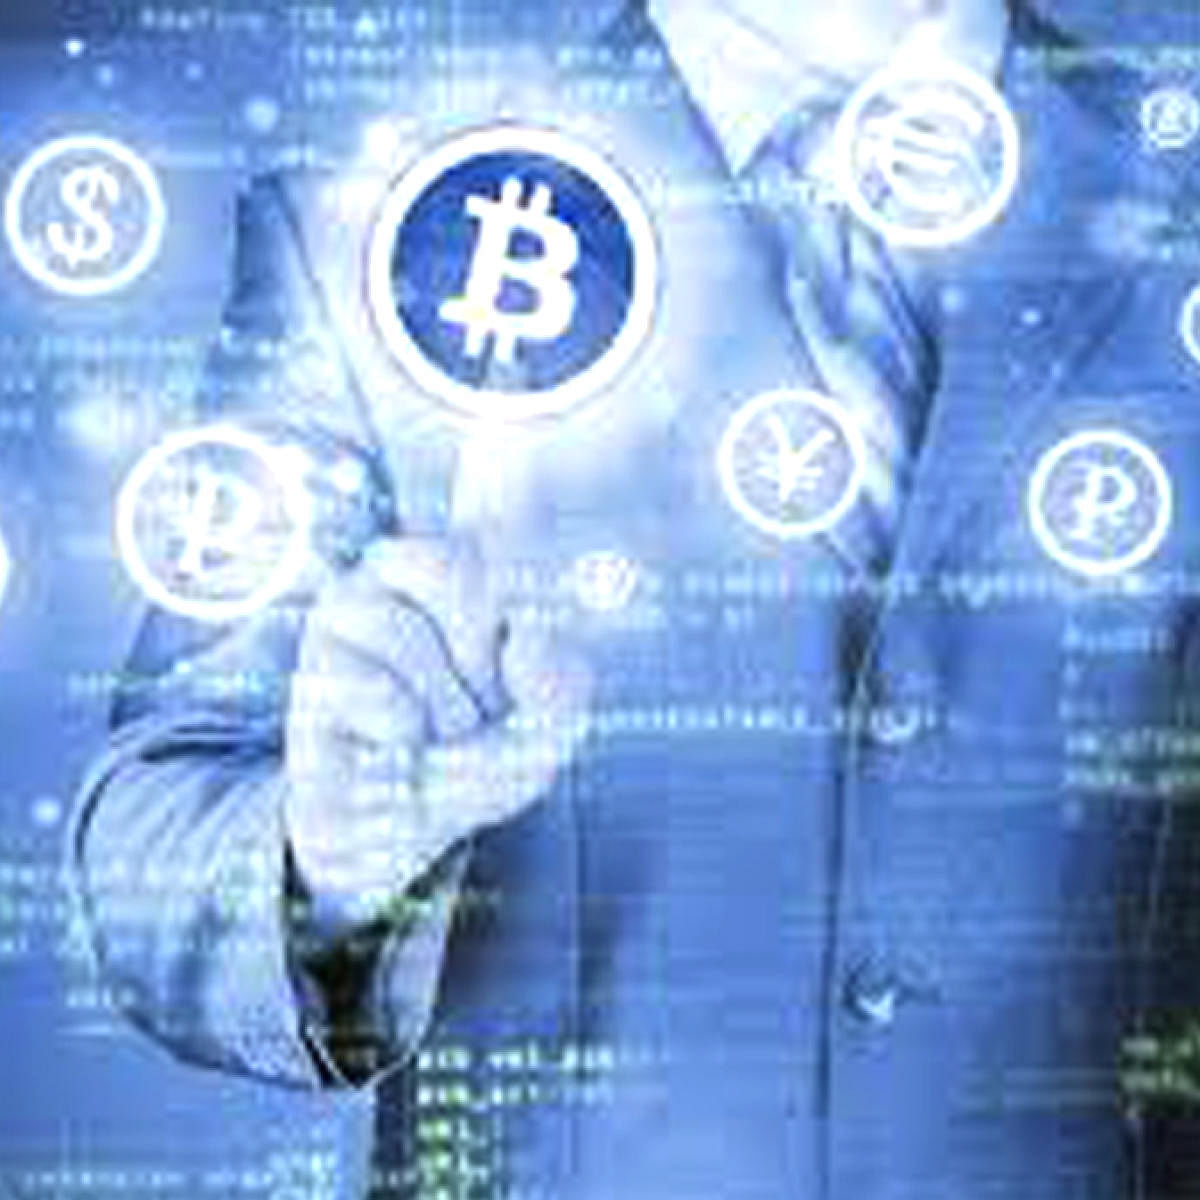 The Bitcoin idea was to provide a currency which completely bypasses any government currency controls and removes all third-party payment processing intermediaries.